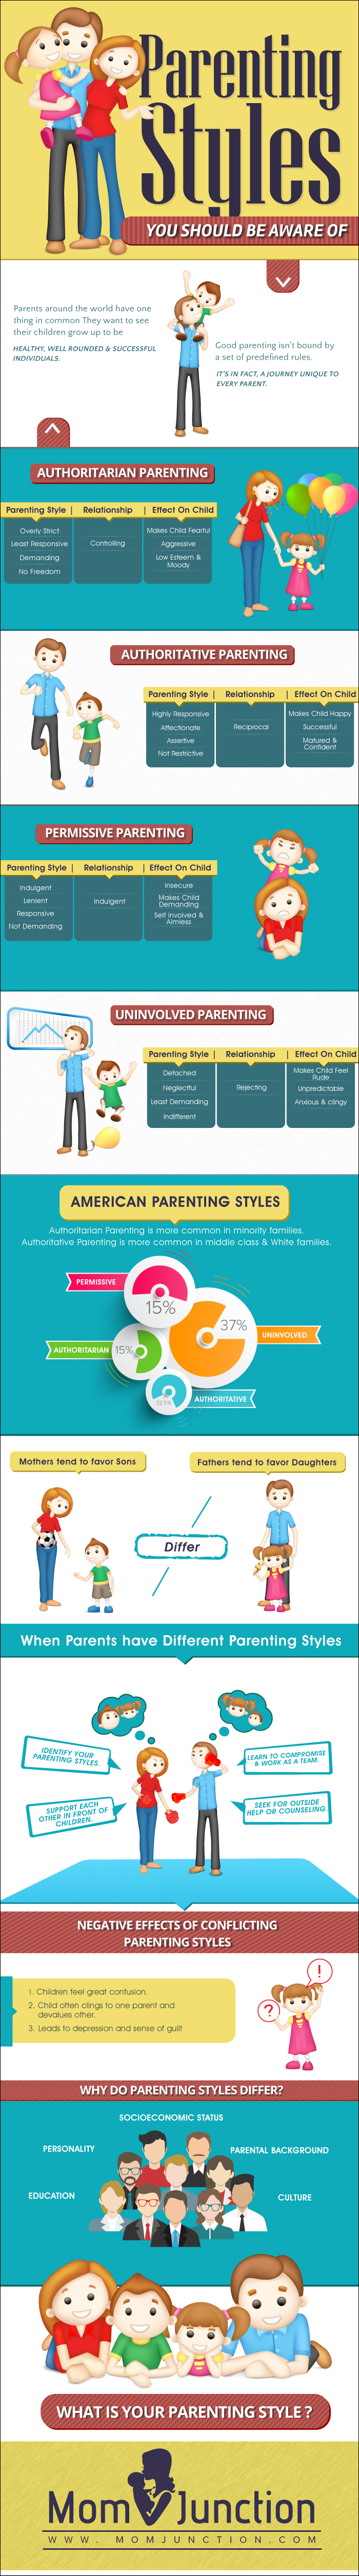 research on parenting styles and children's behavior